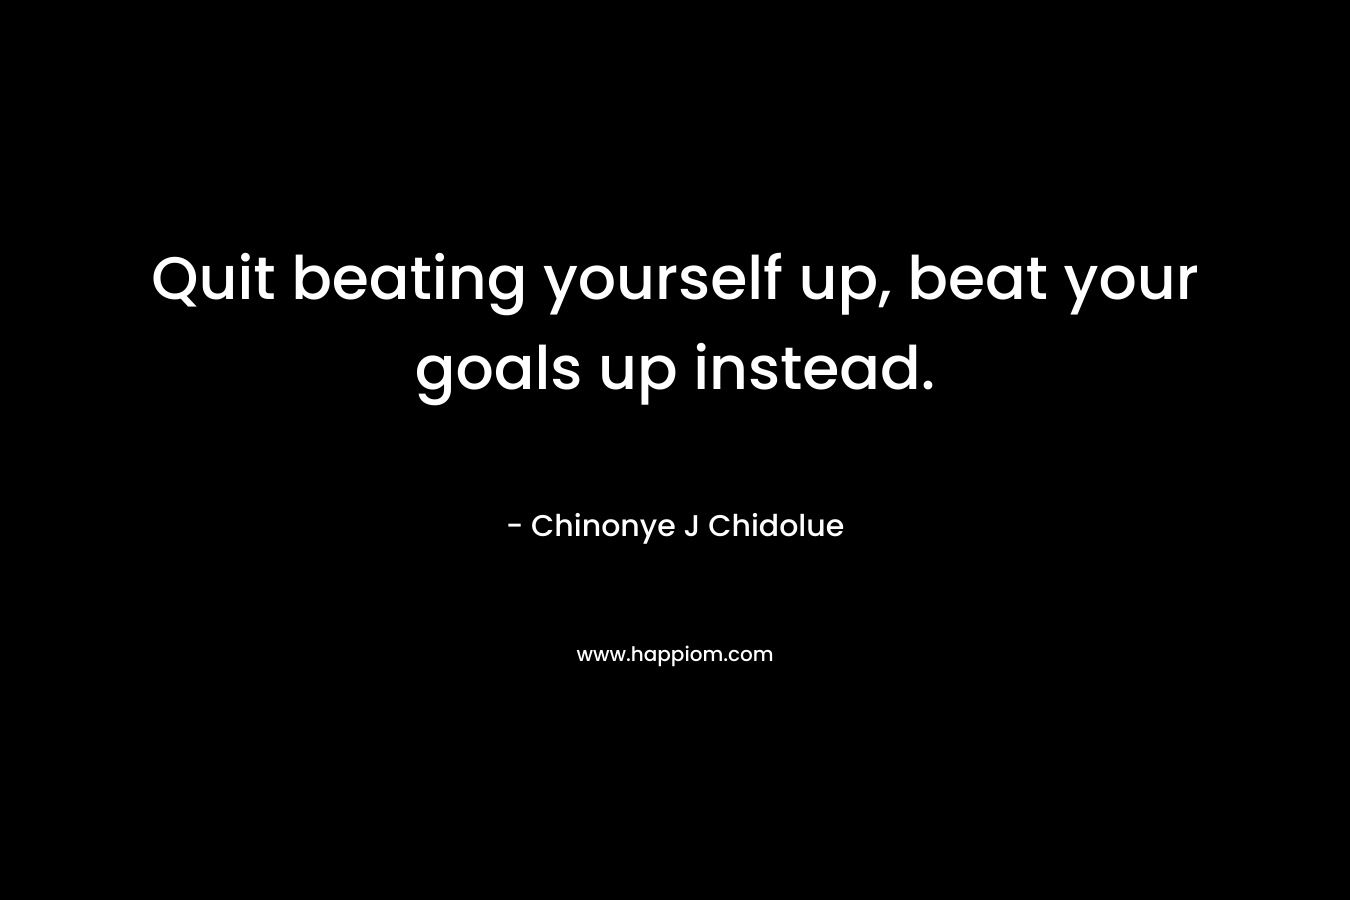 Quit beating yourself up, beat your goals up instead.